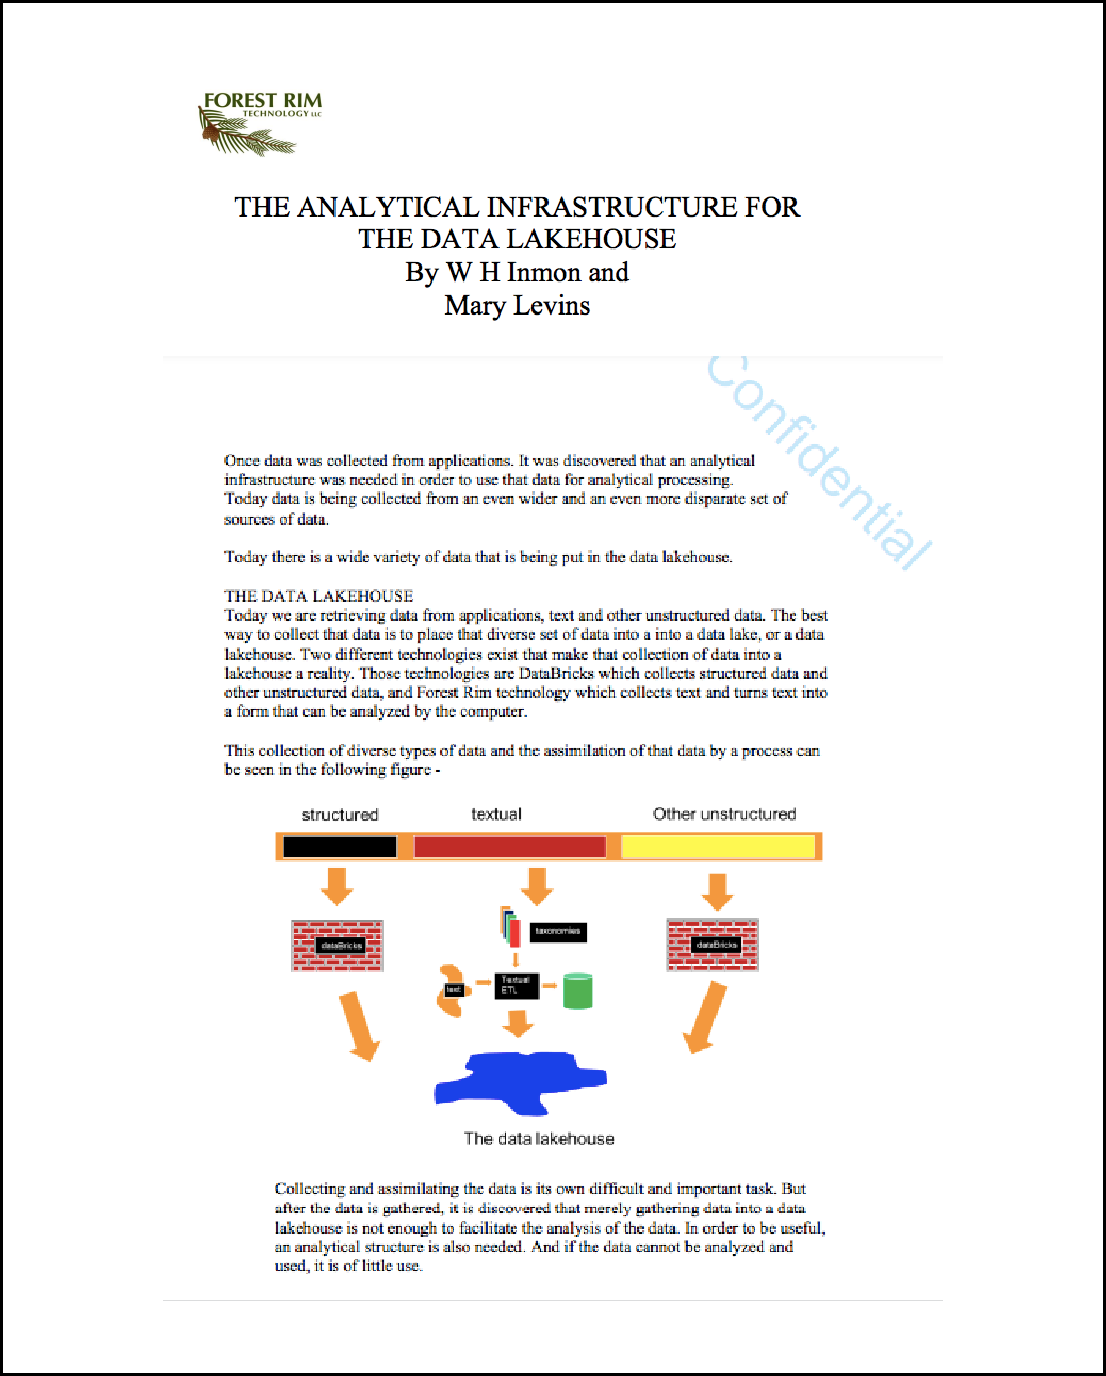 THE ANALYTICAL INFRASTRUCTURE FOR THE DATA LAKEHOUSE